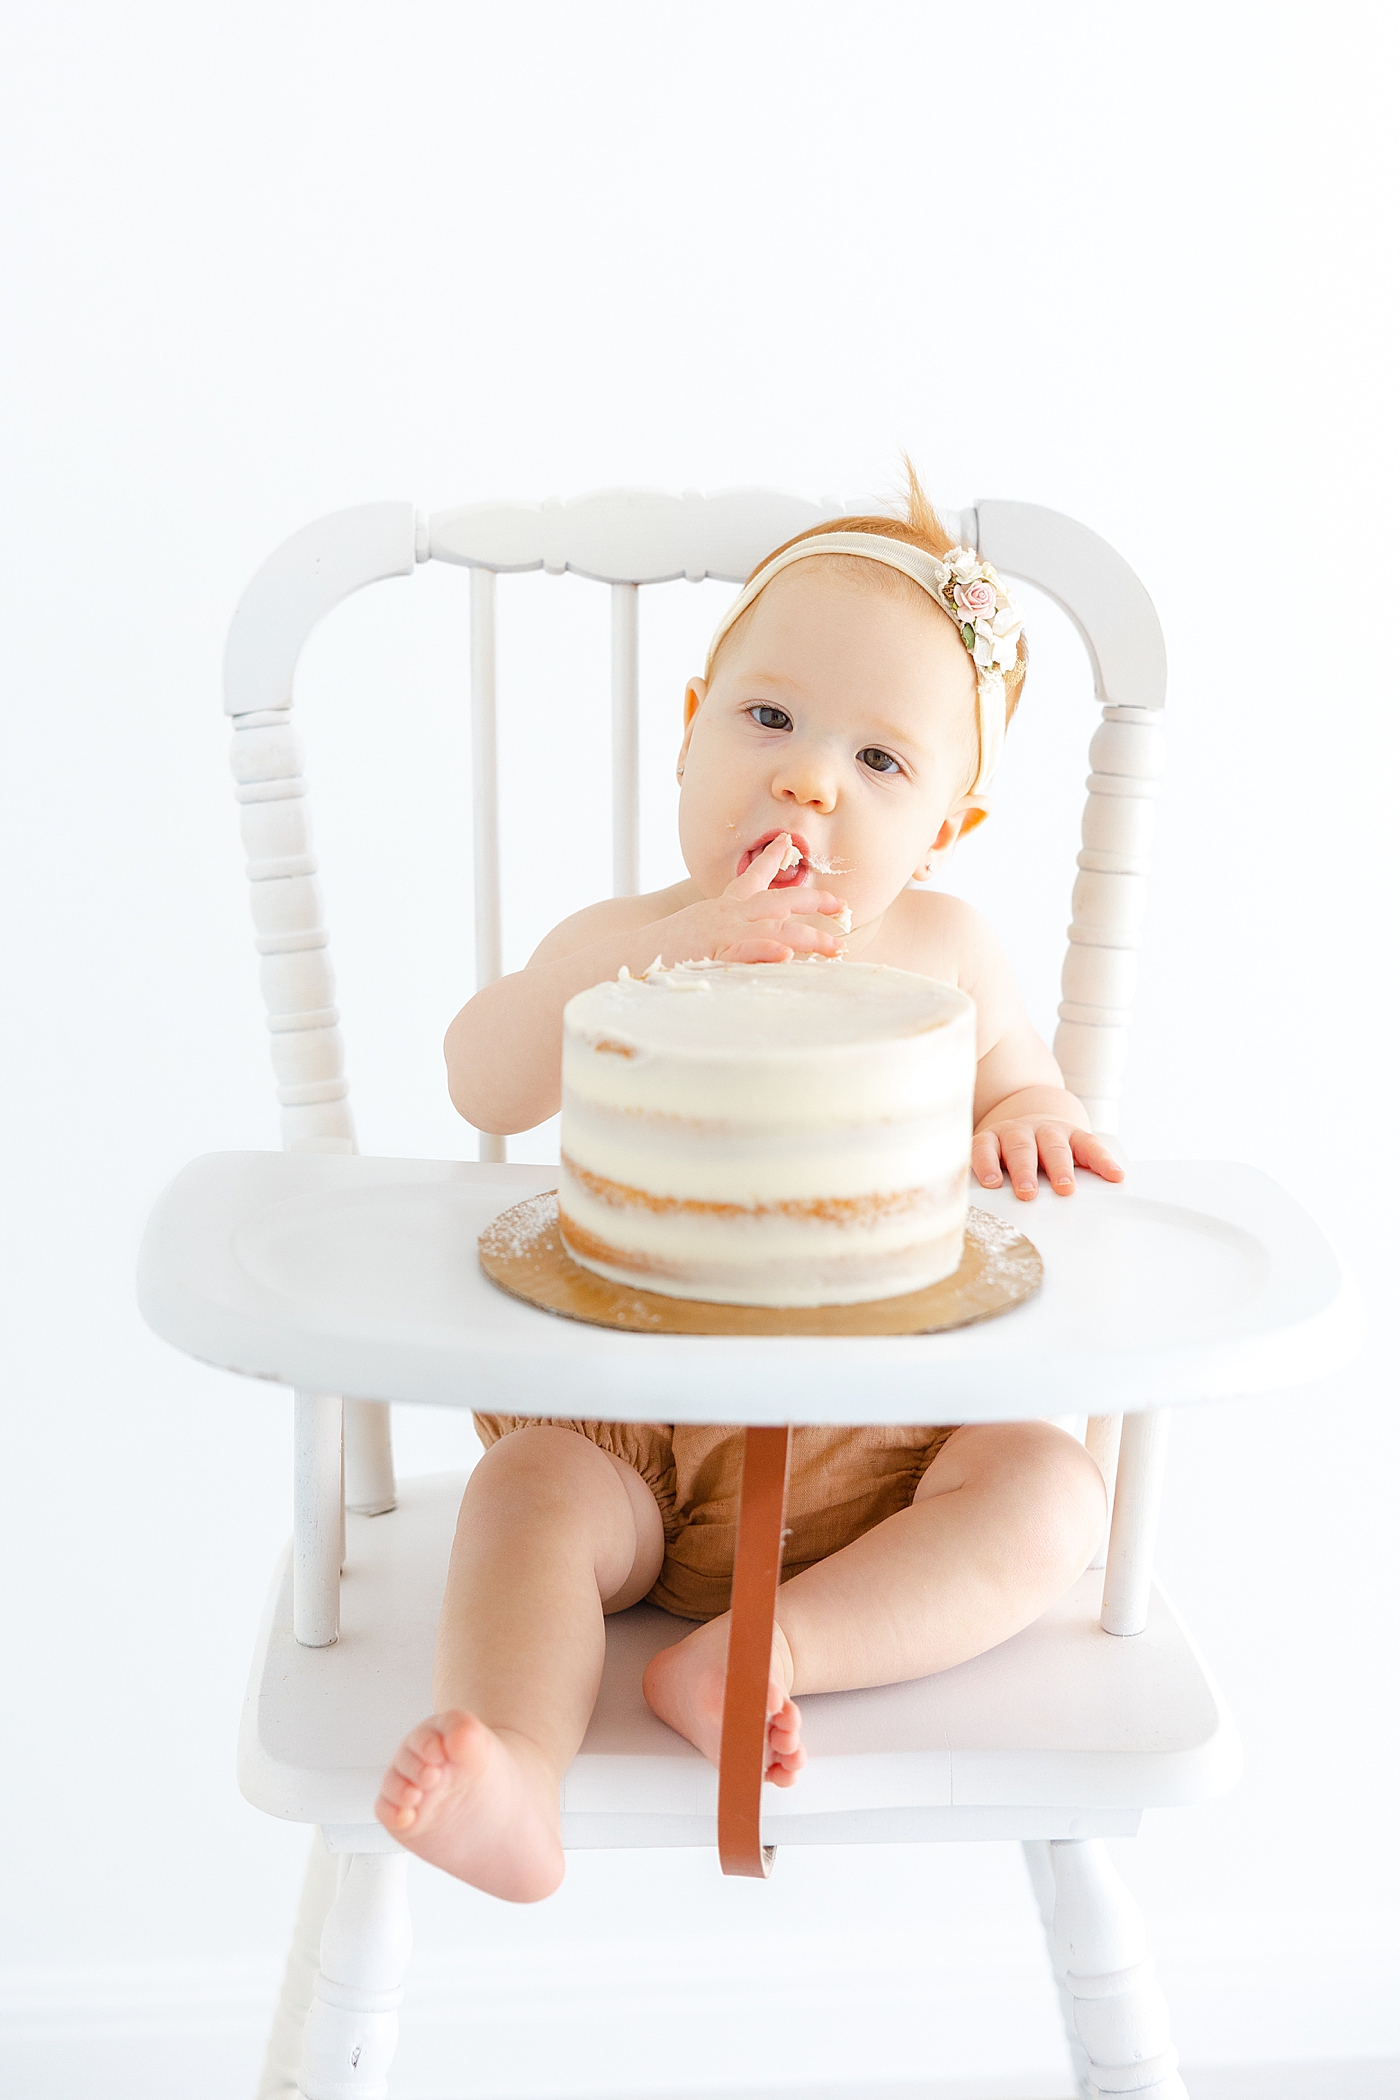 Baby girl eating cake during her One Year Milestone Collection | Image by Sana Ahmed Photography